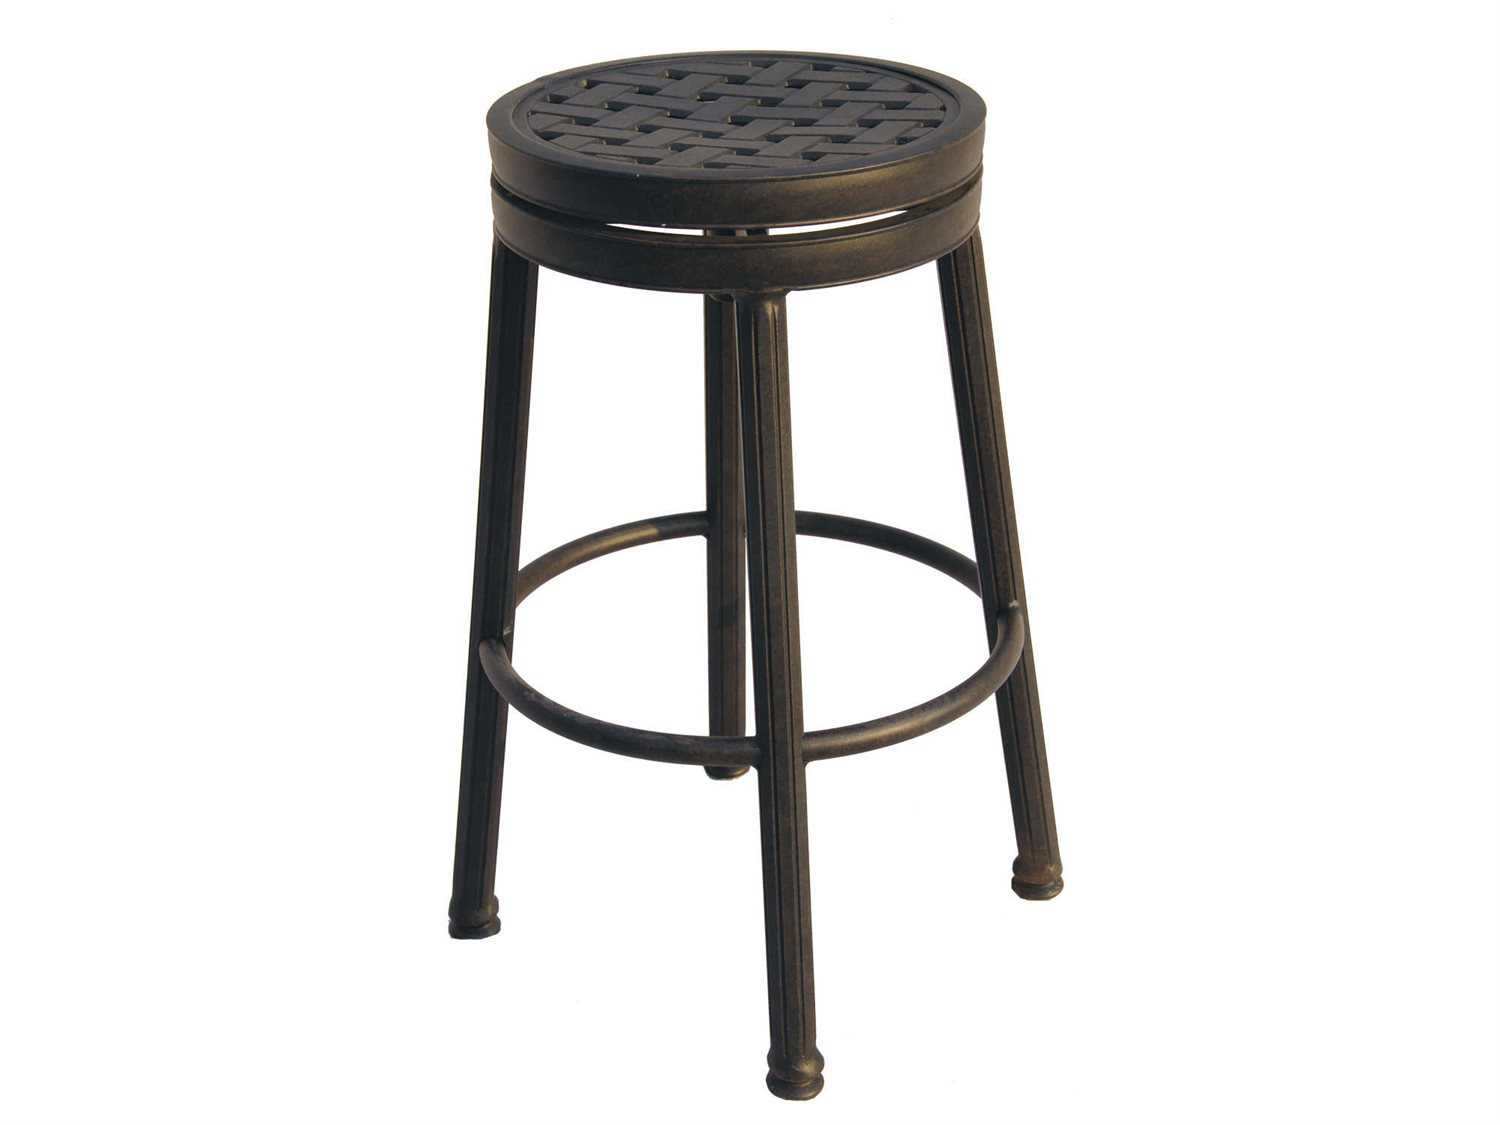 Darlee Outdoor Living Backless, Round Bar Stool Tops